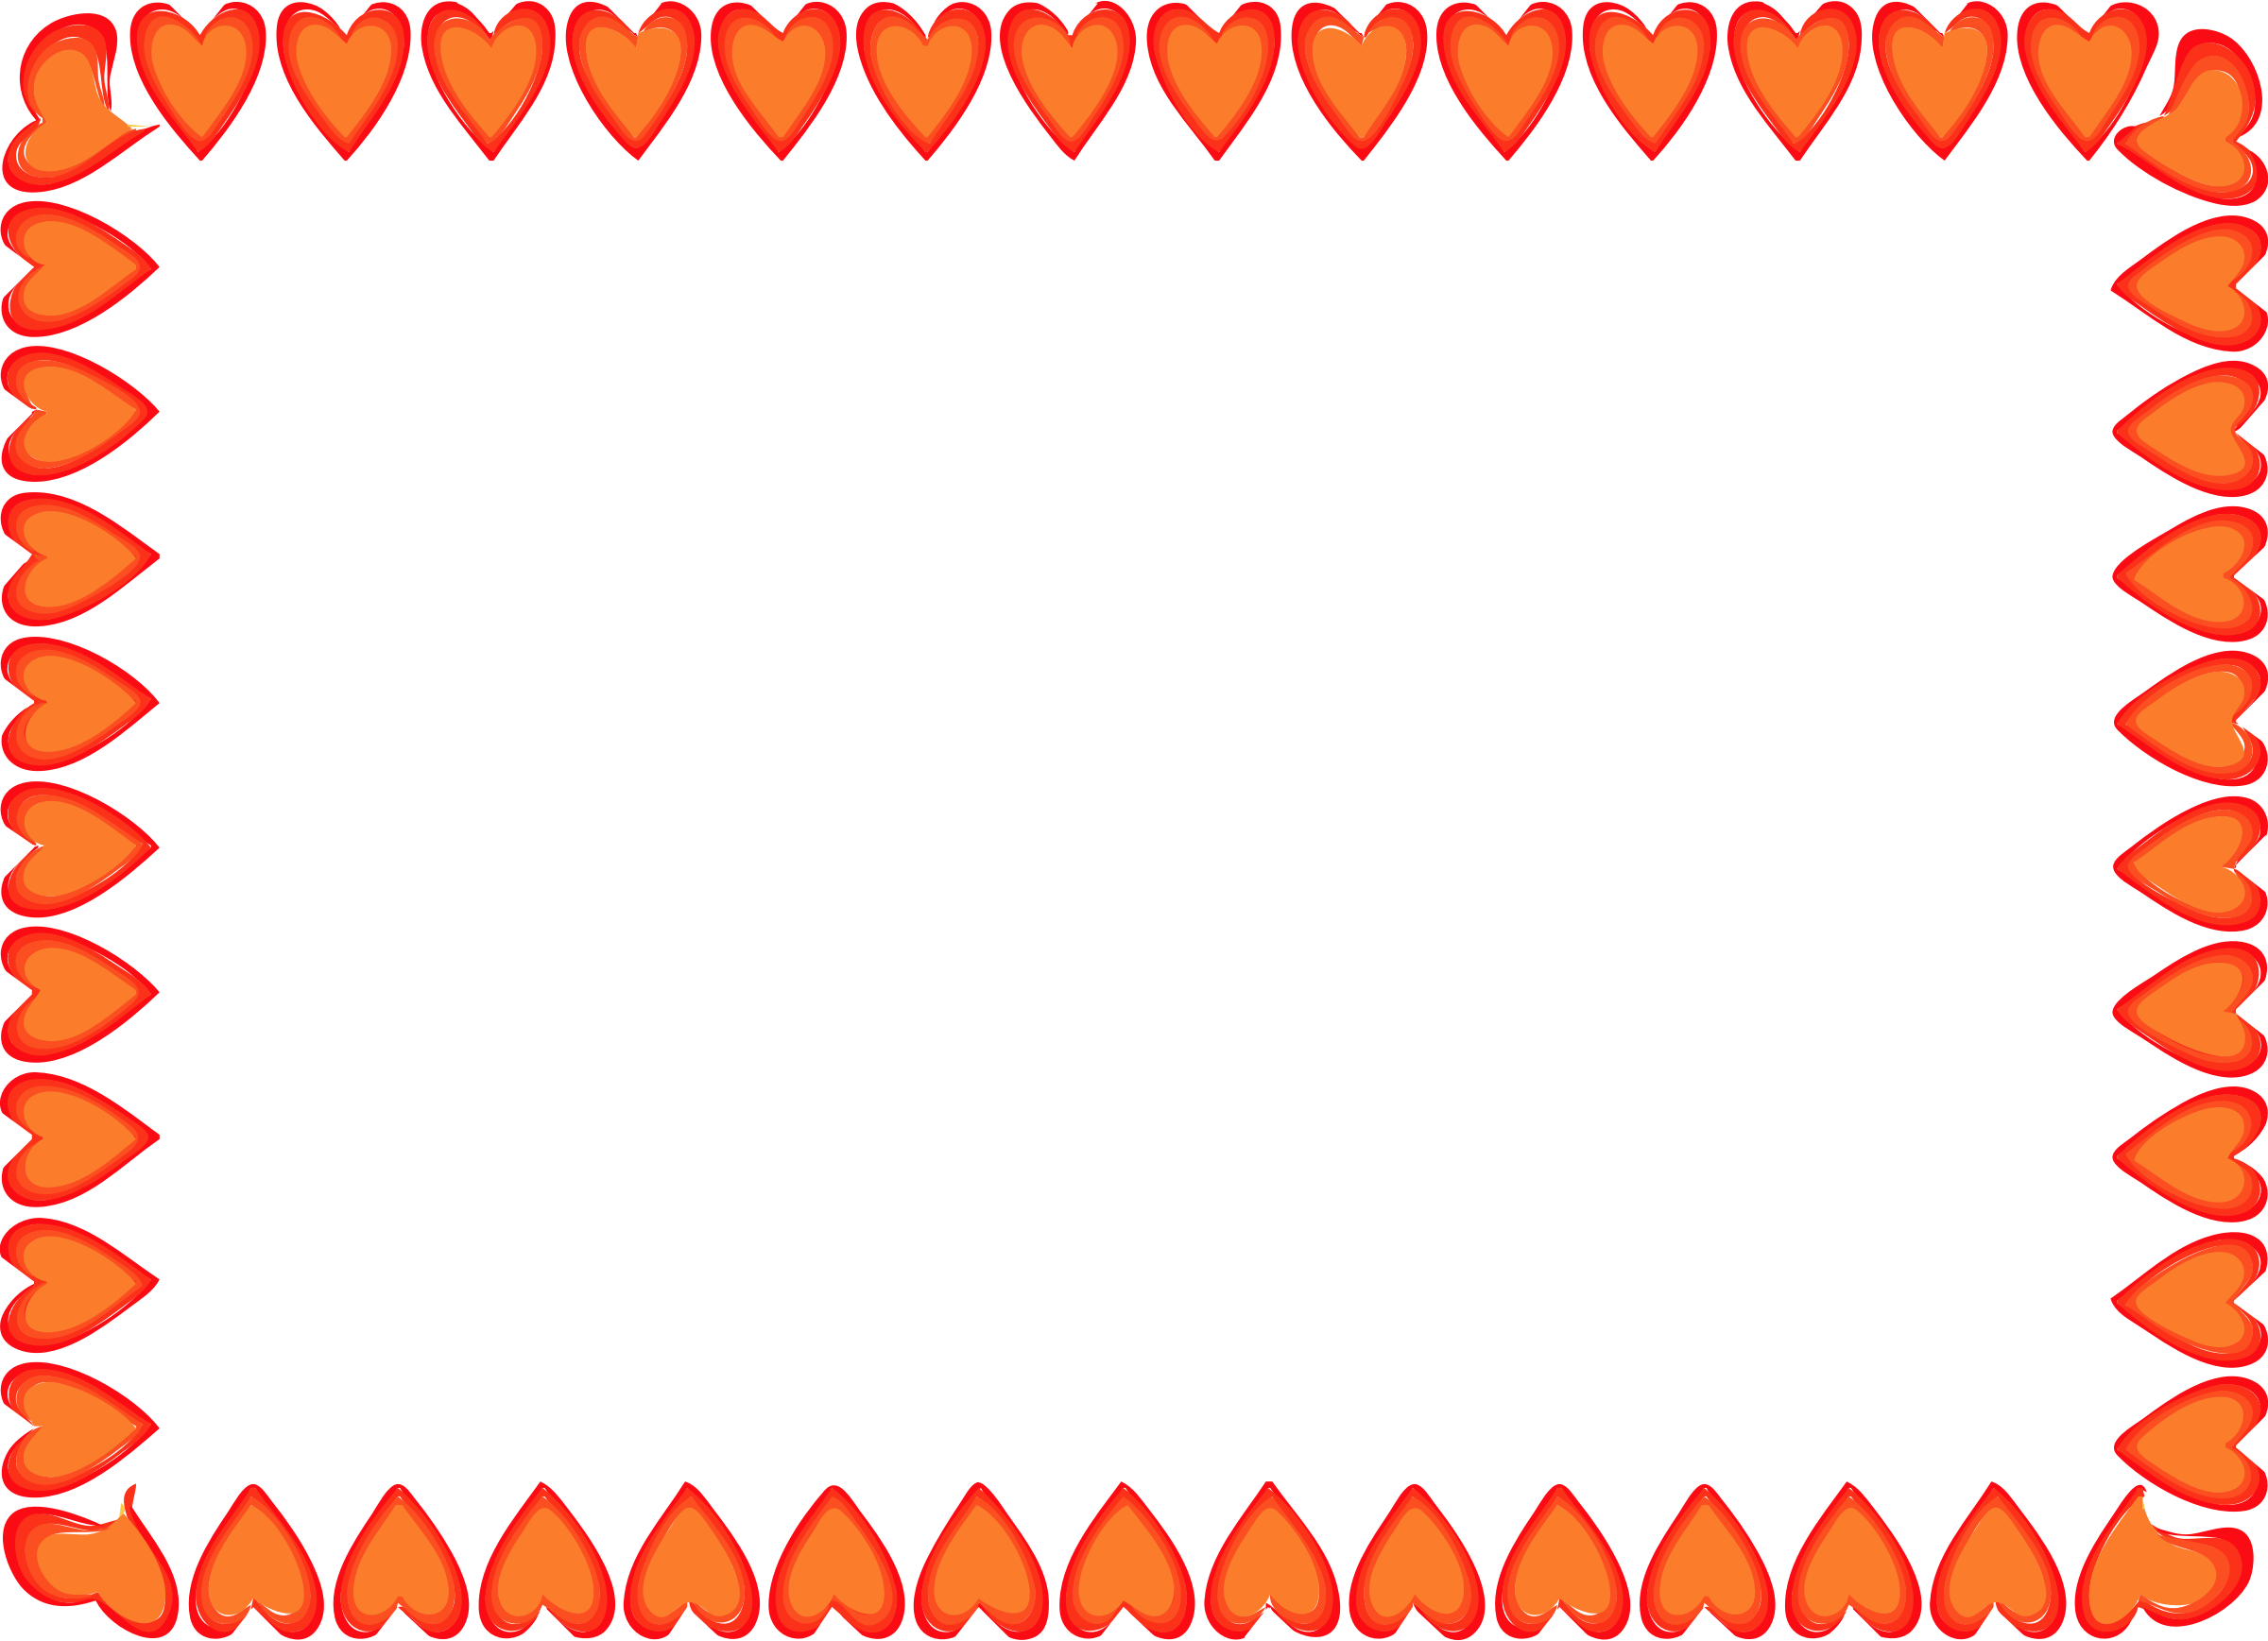 This Free Icons Png Design Of Red Hearts Border Hdpng.com  - Heart Border, Transparent background PNG HD thumbnail